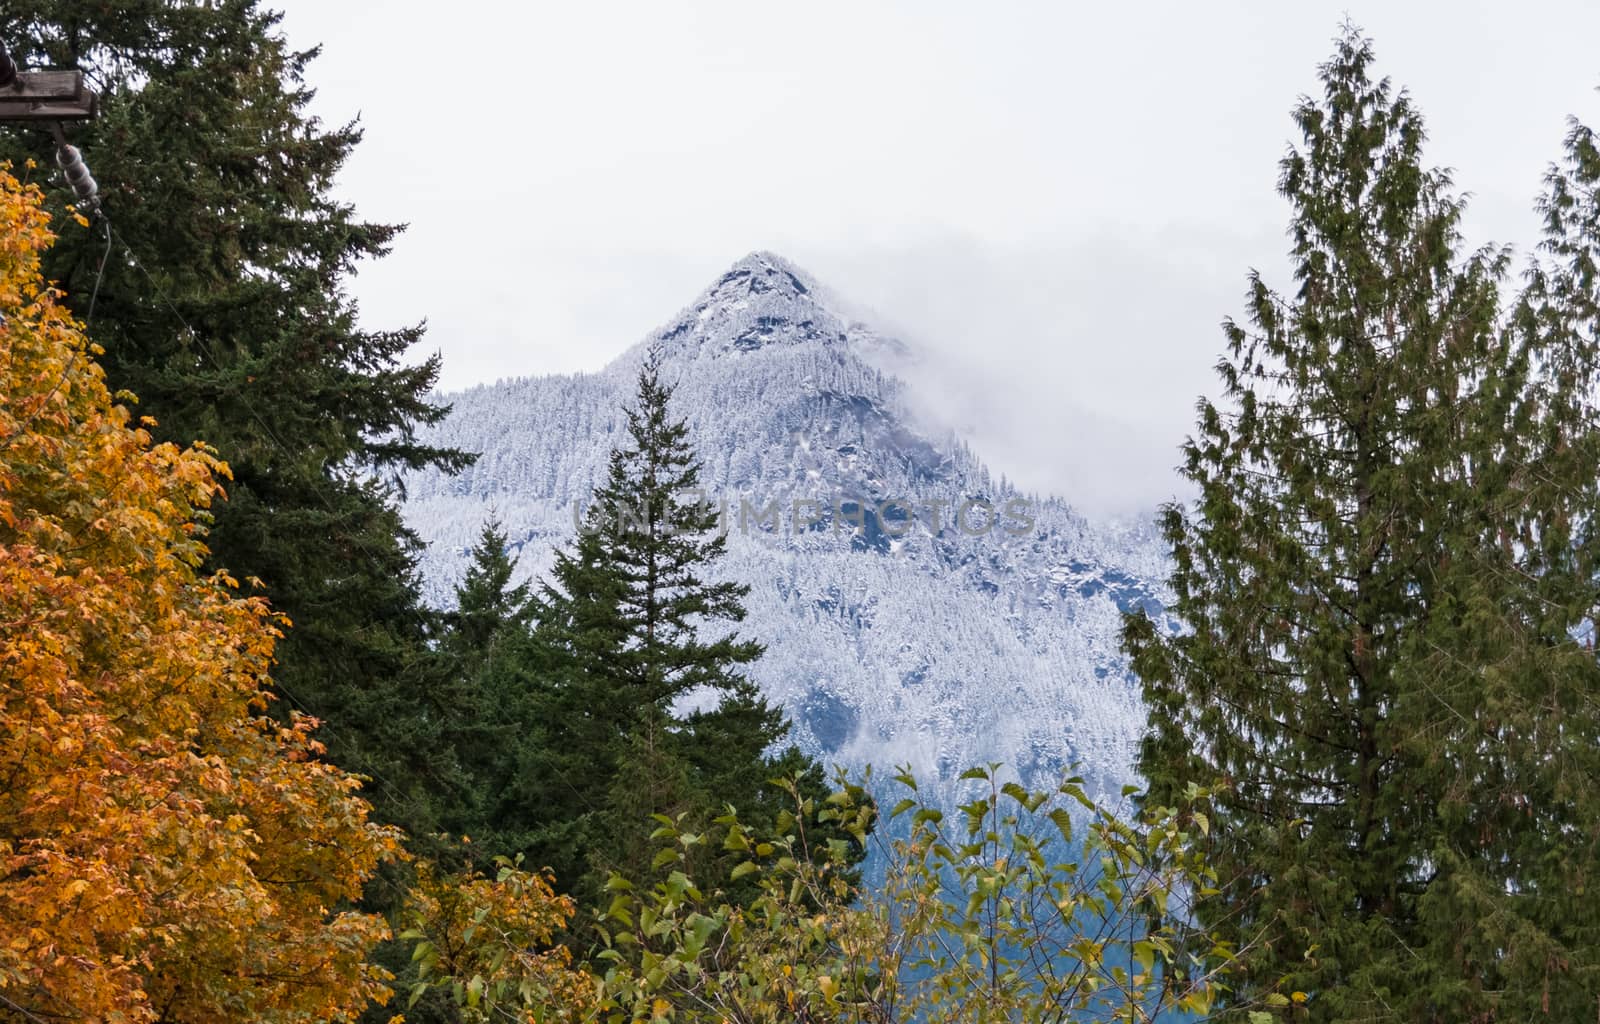 High mounting peak on autumn time in British Columbia by Imagenet